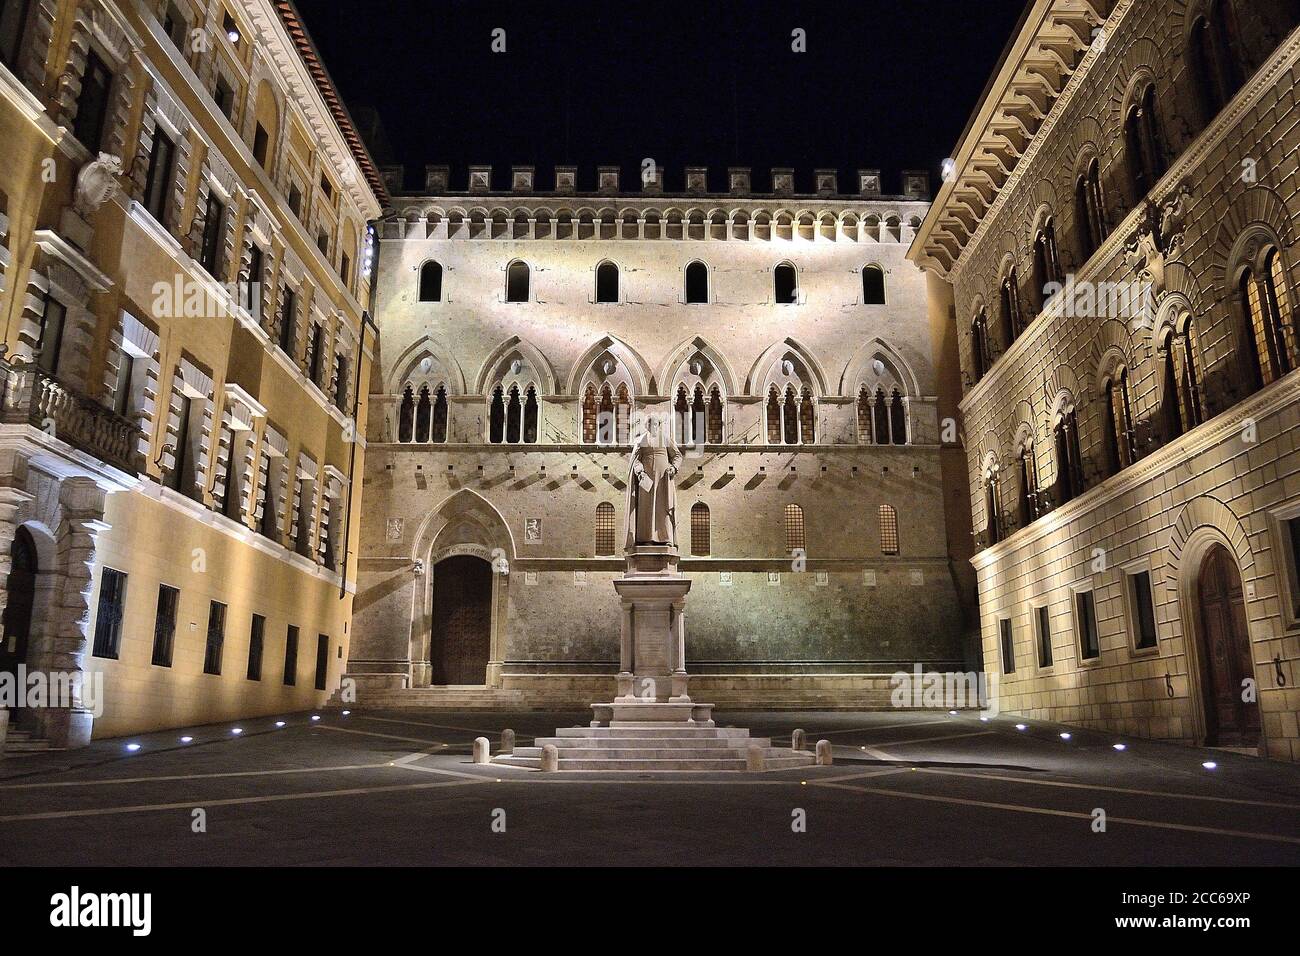 Everything counts in large amounts... since 1472 - Siena, Italy Stock Photo